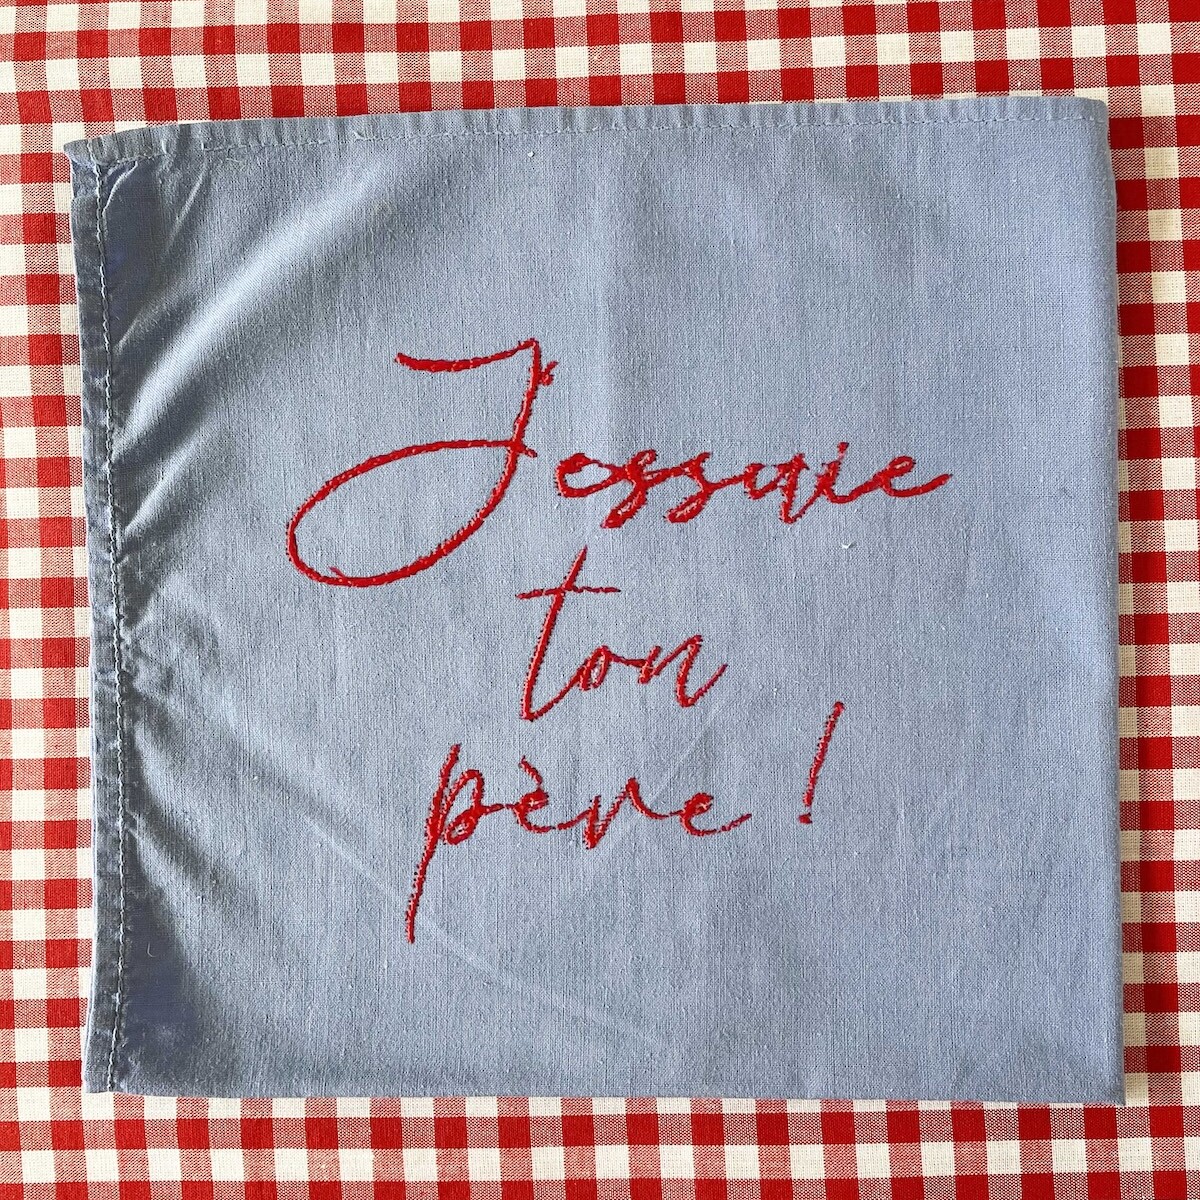 UPCYCLING SERVIETTE DE TABLE J'ESSUIE TON PERE BY BROC INTO THE MOON